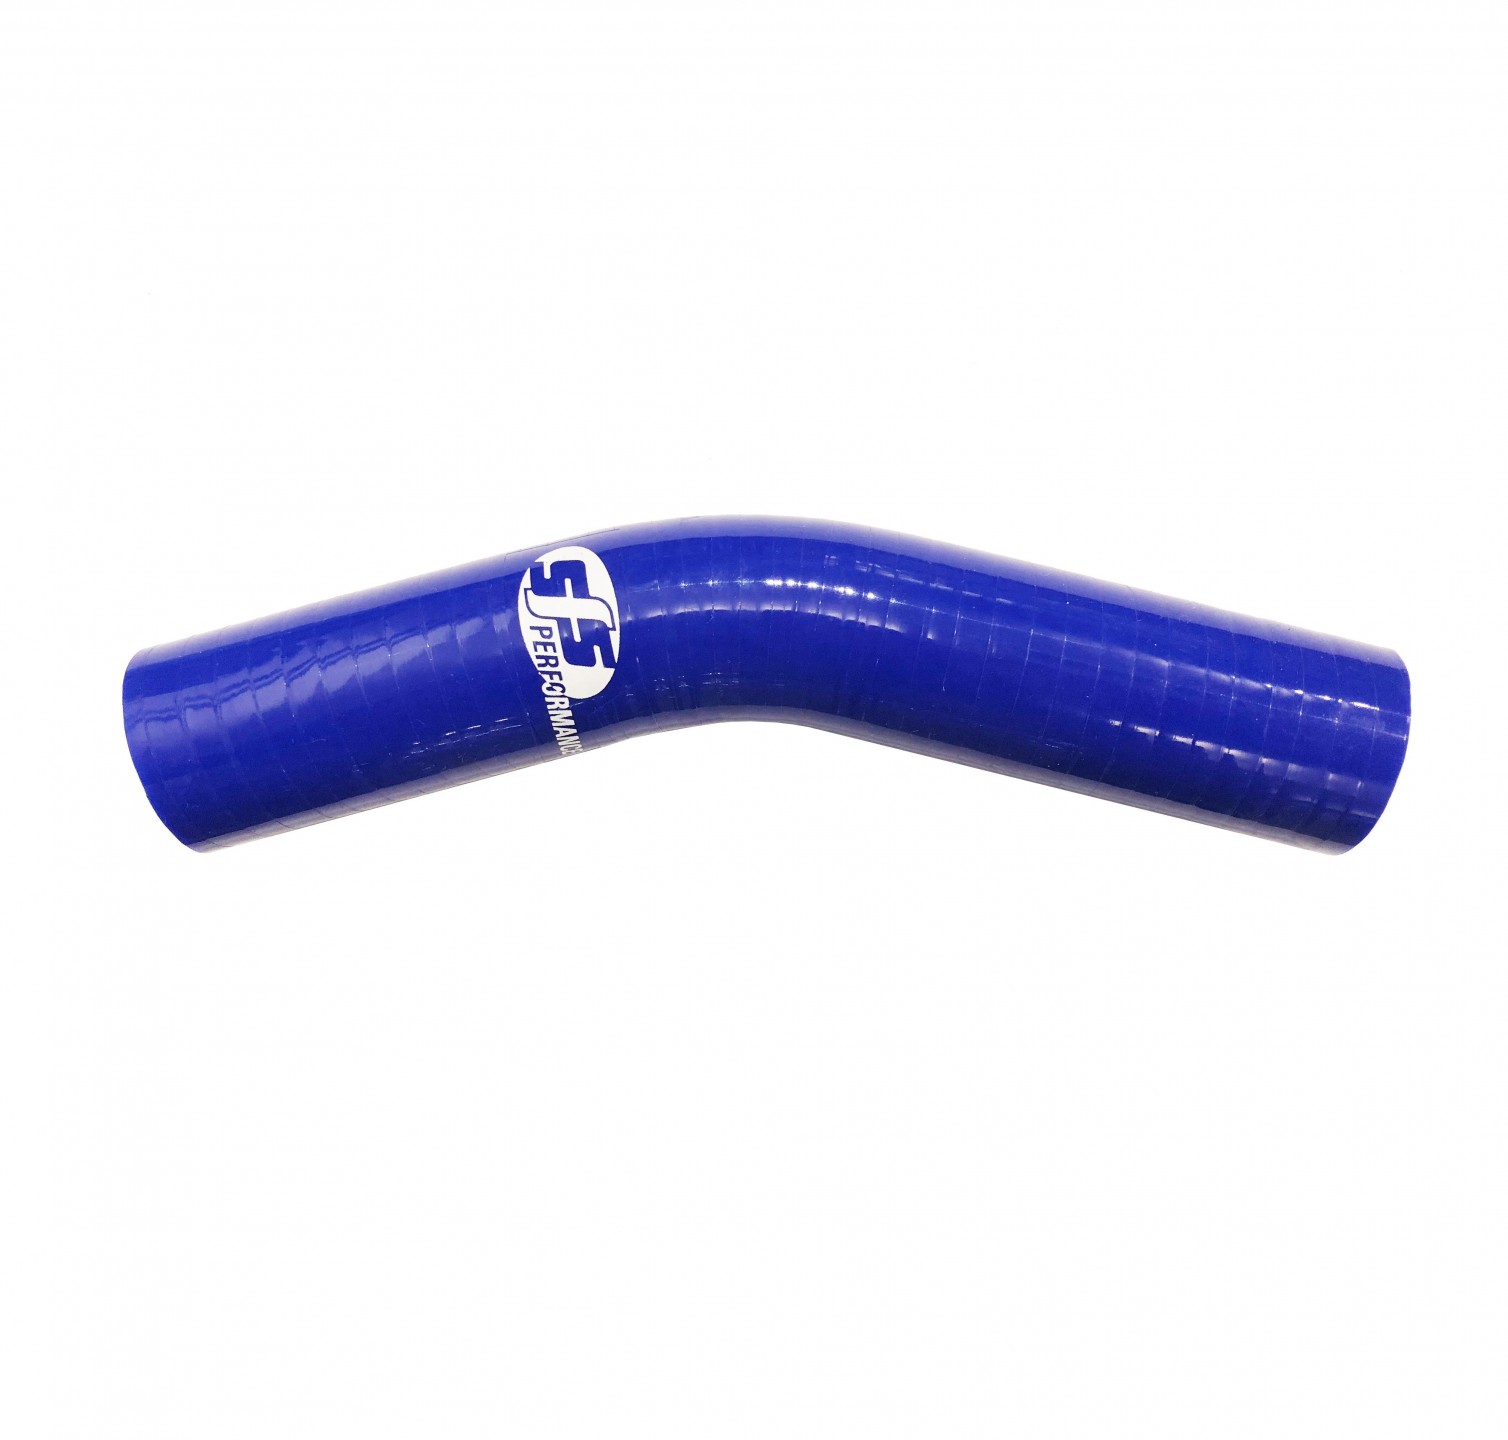 30° silicon elbow 102 mm bore 152 mm legs 3 ply Blue